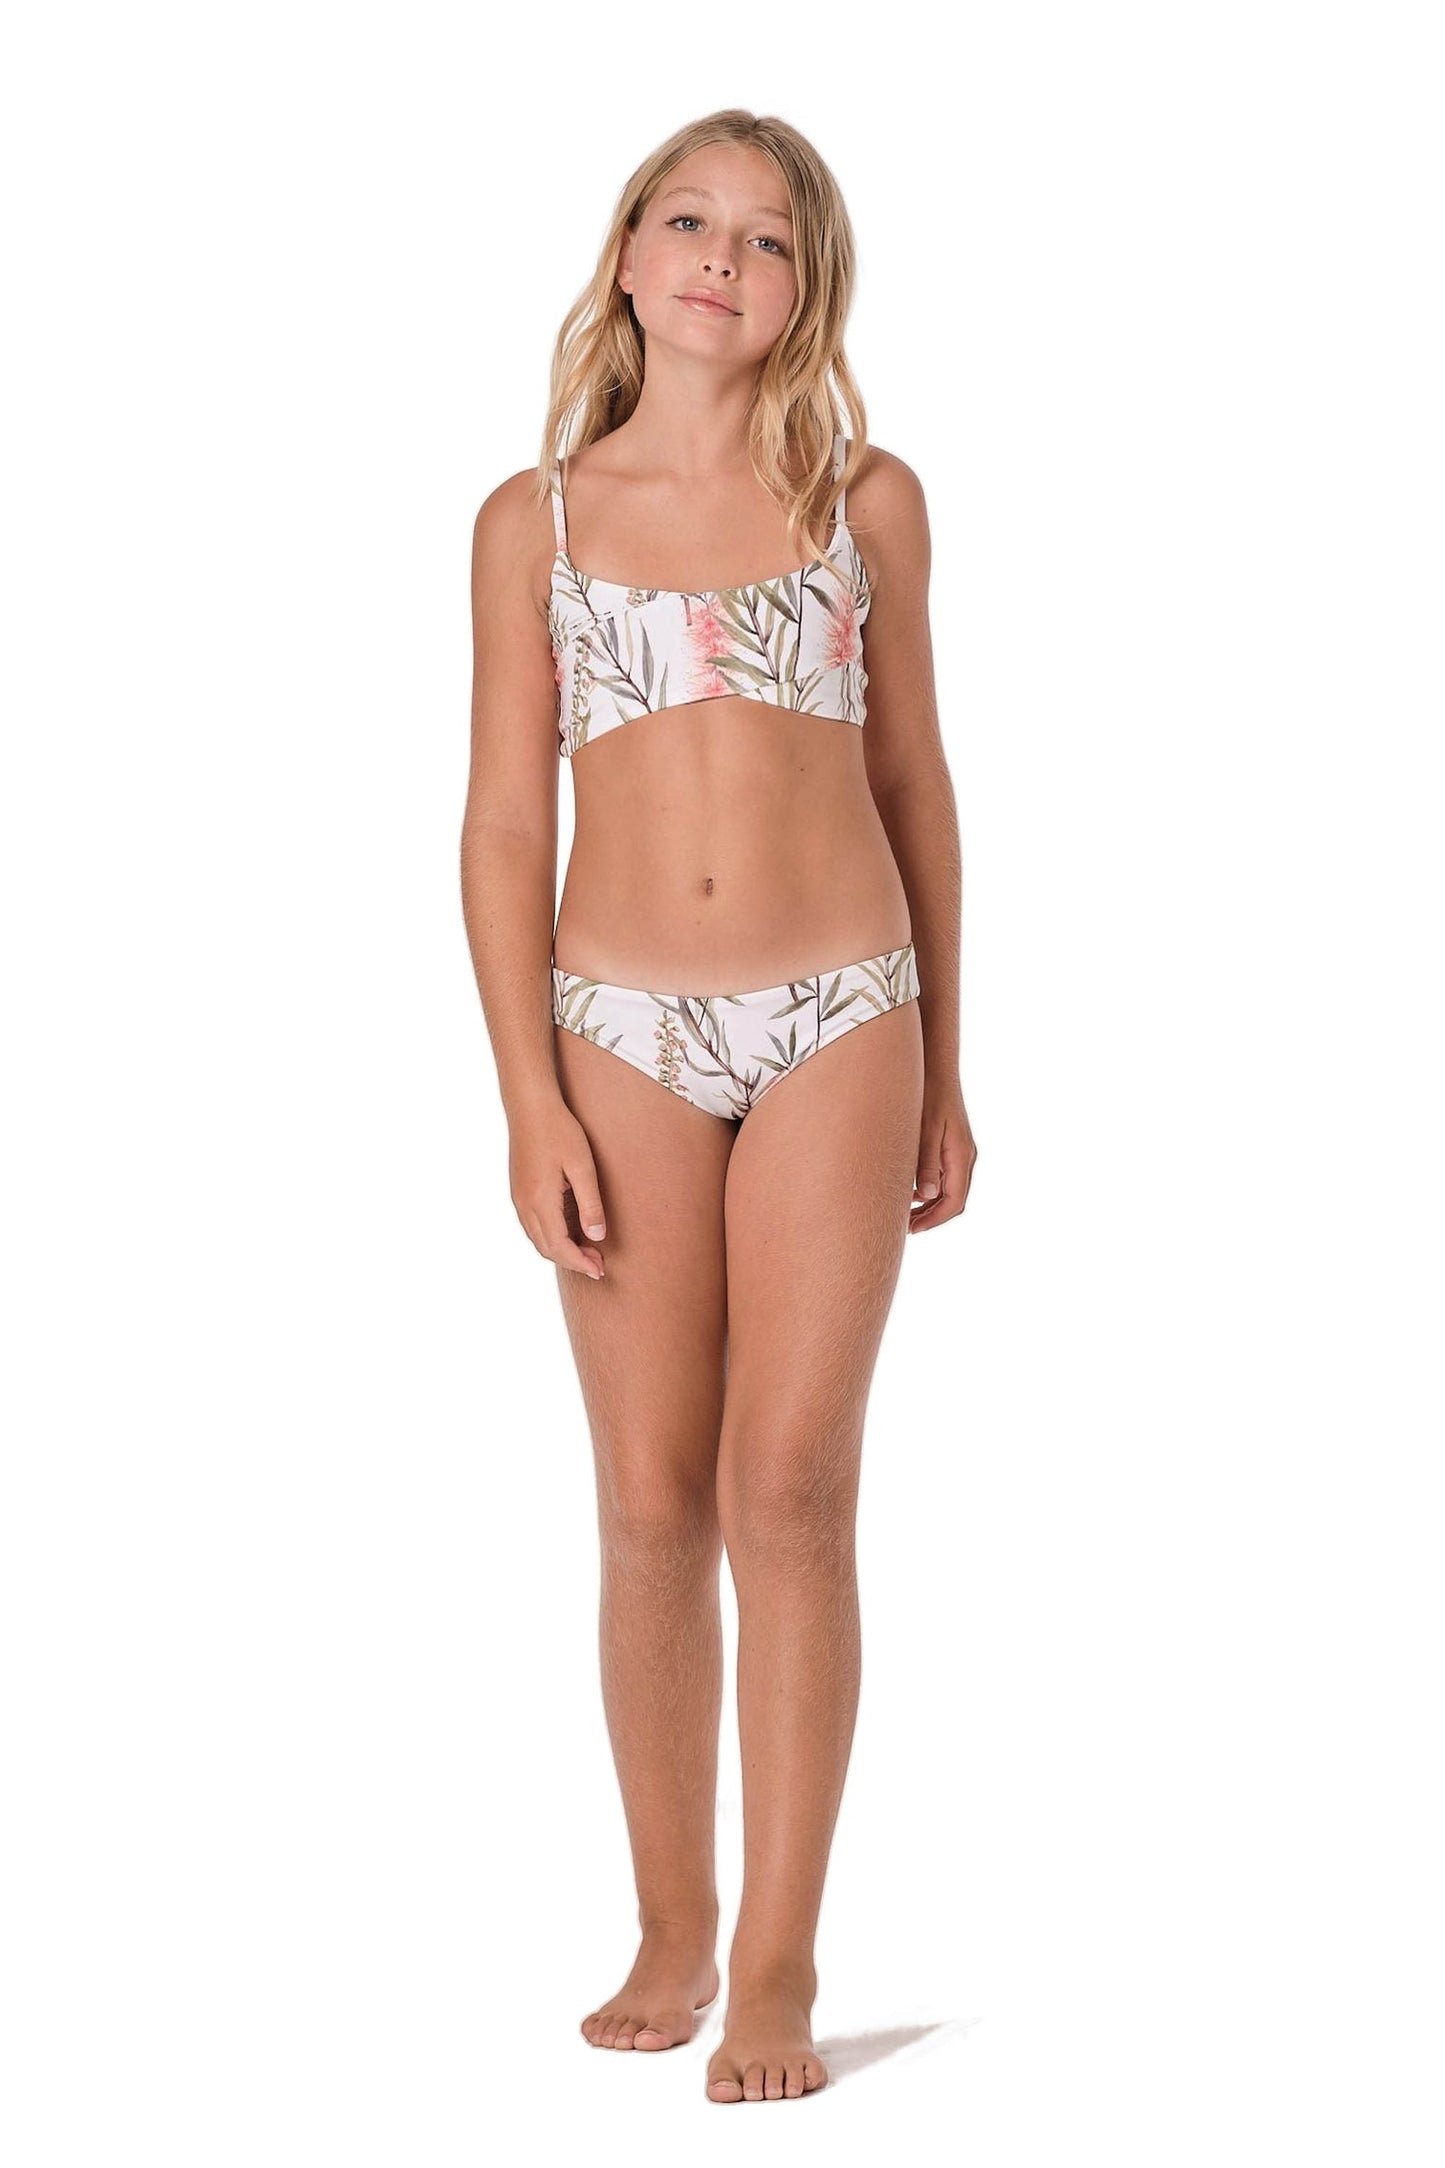 Model image of bikini set. Design is white with floral/paradise look.